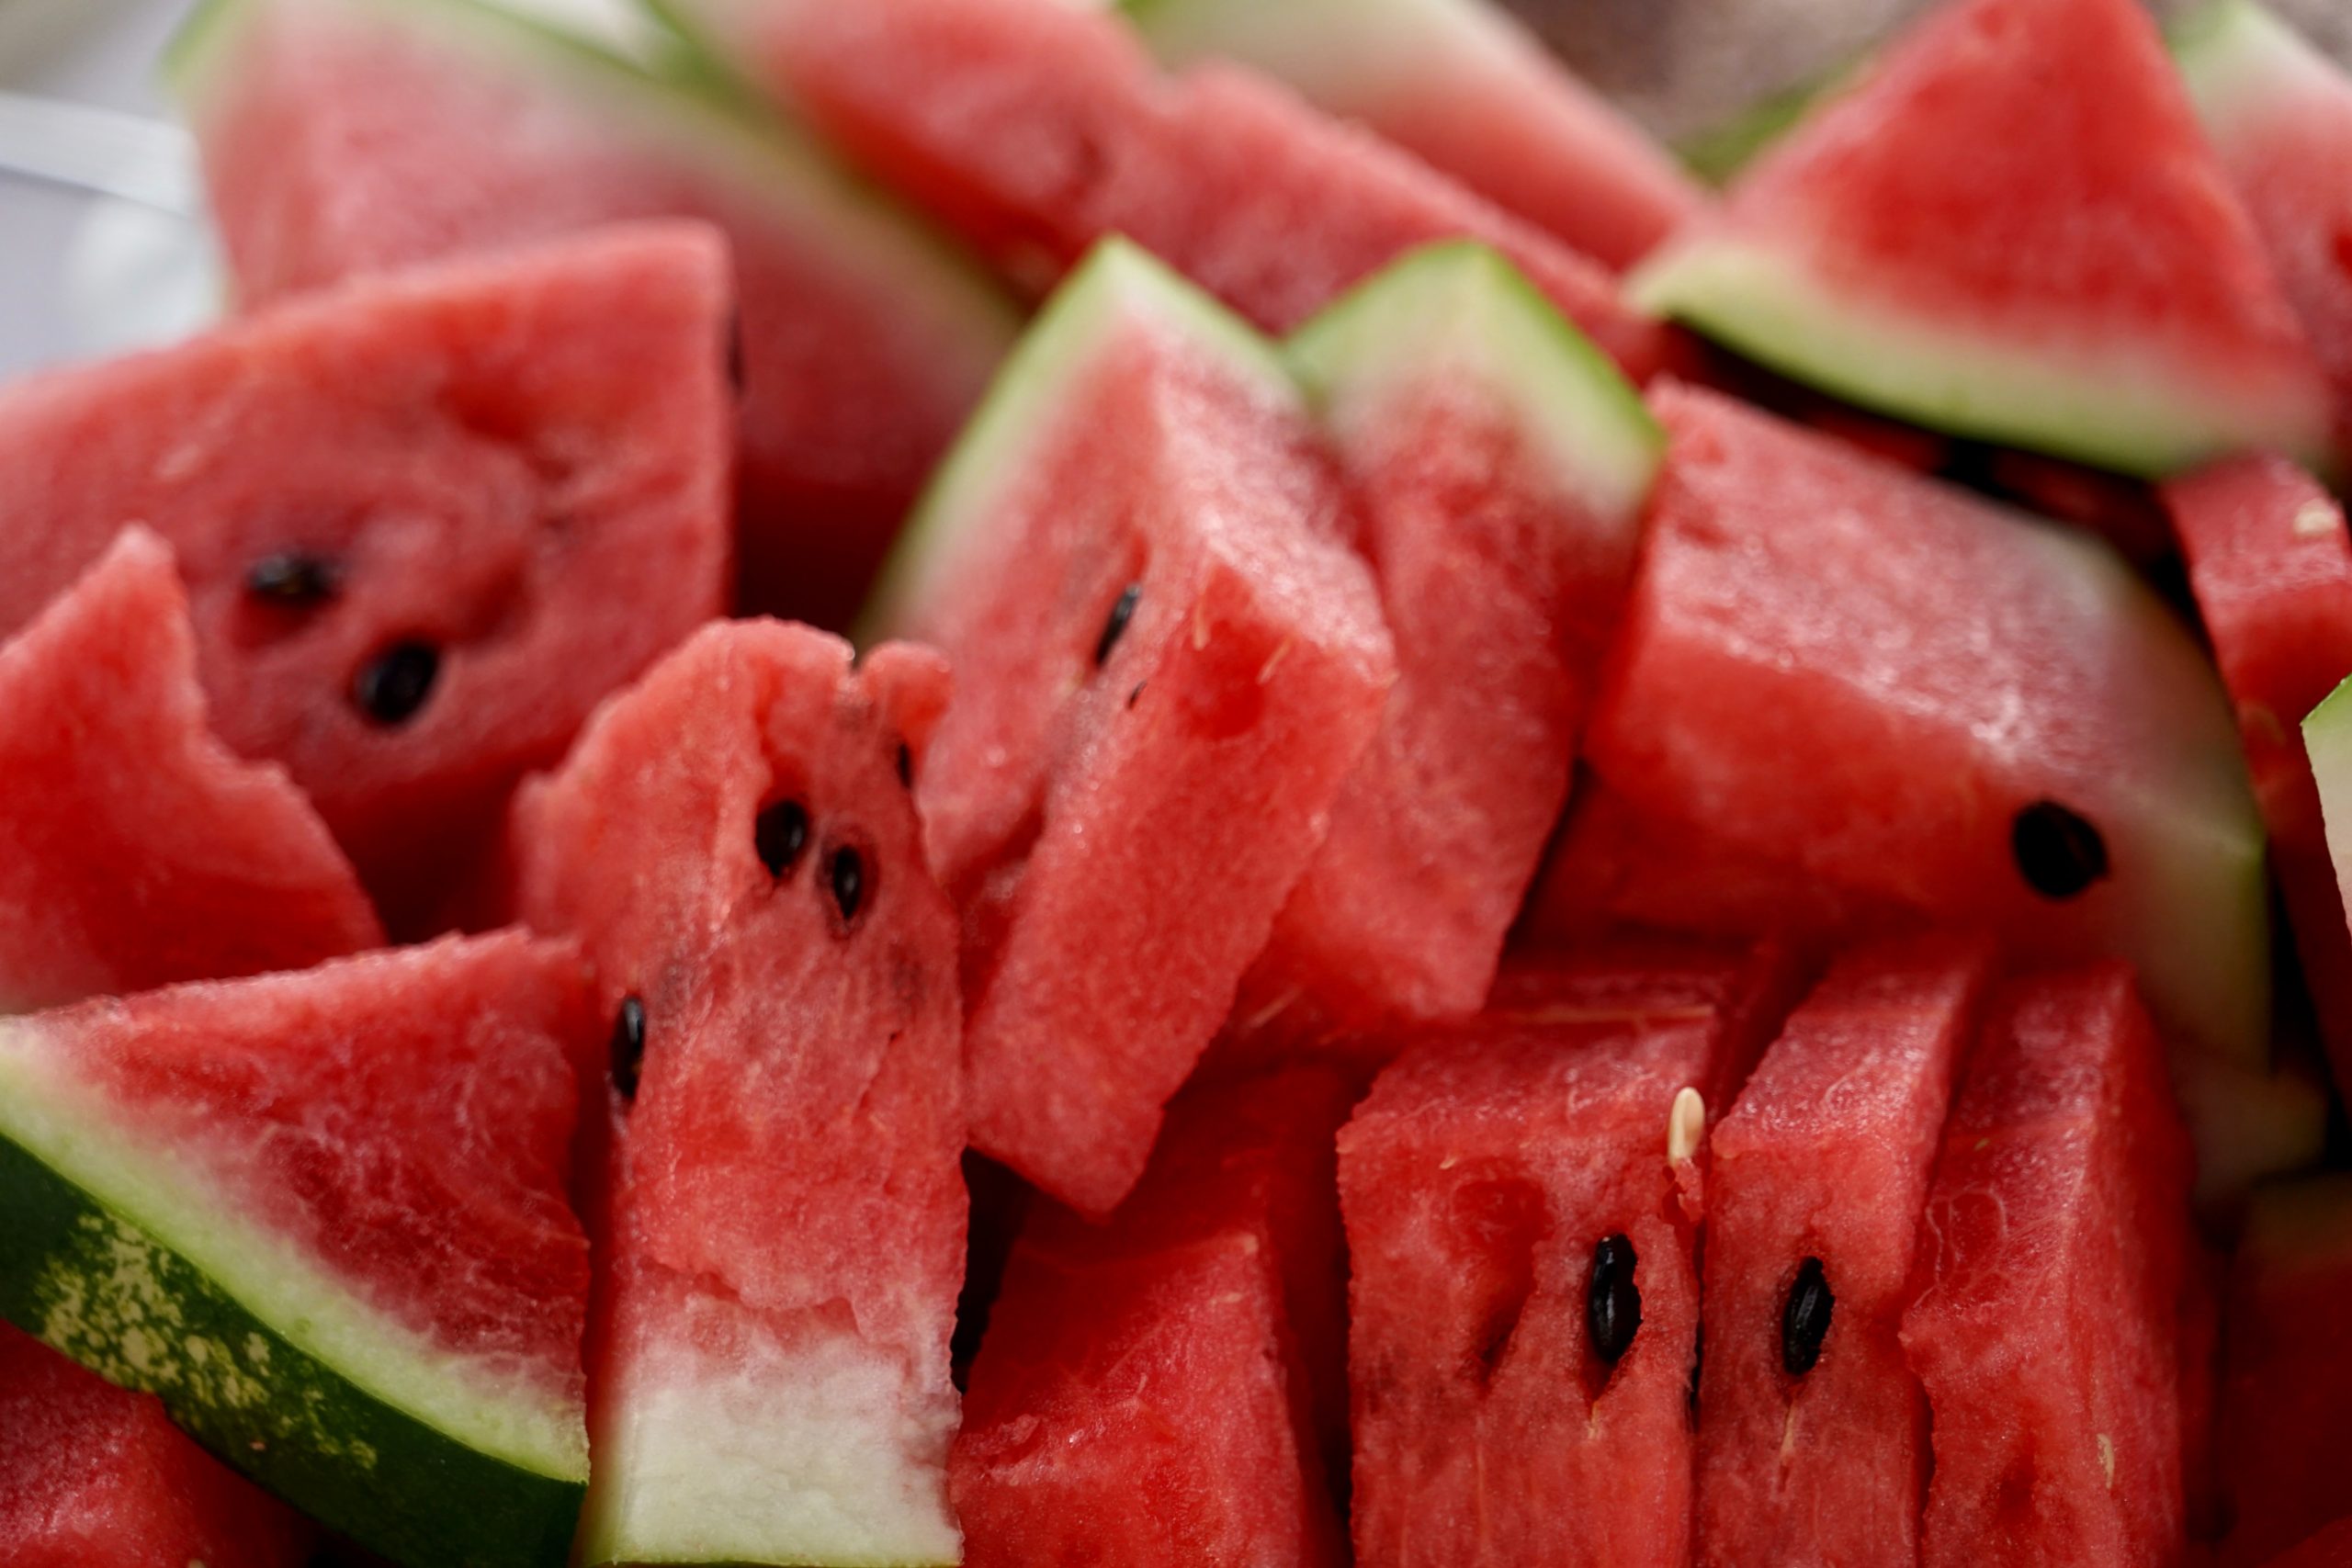 How Many Seeds In A Watermelon?